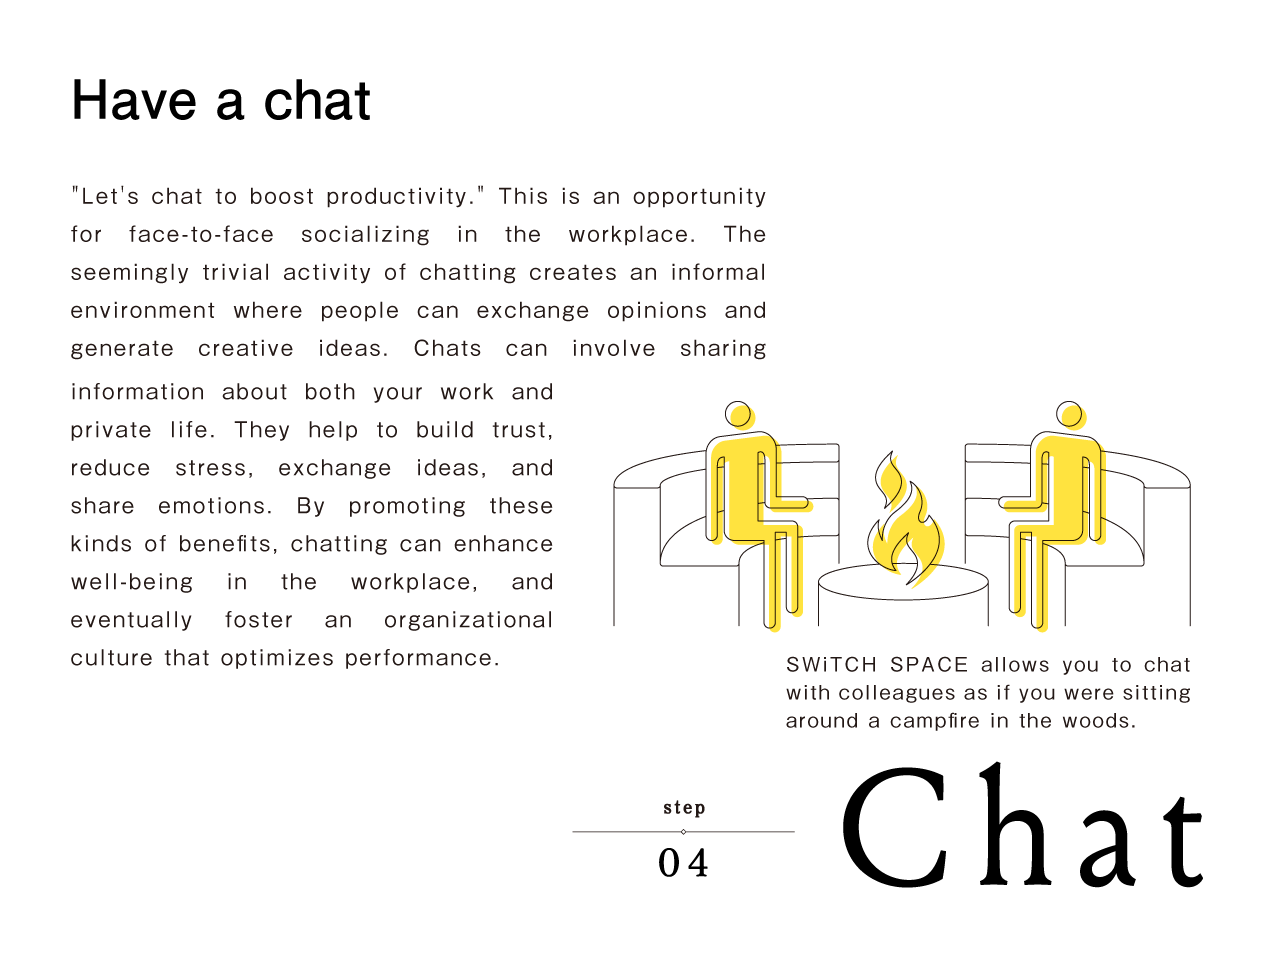 Step 4: Chat | Have a chat | 'Let's chat to boost productivity.' This is an opportunity for face-to-face socializing in the workplace. The seemingly trivial activity of chatting creates an informal environment where people can exchange opinions and generate creative ideas. Chats can involve sharing information about both your work and private life. They help to build trust, reduce stress, exchange ideas, and share emotions. By promoting these kinds of benefits, chatting can enhance well-being in the workplace, and eventually foster an organizational culture that optimizes performance. SWiTCH SPACE allows you to chat with colleagues as if you were sitting around a campfire in the woods.